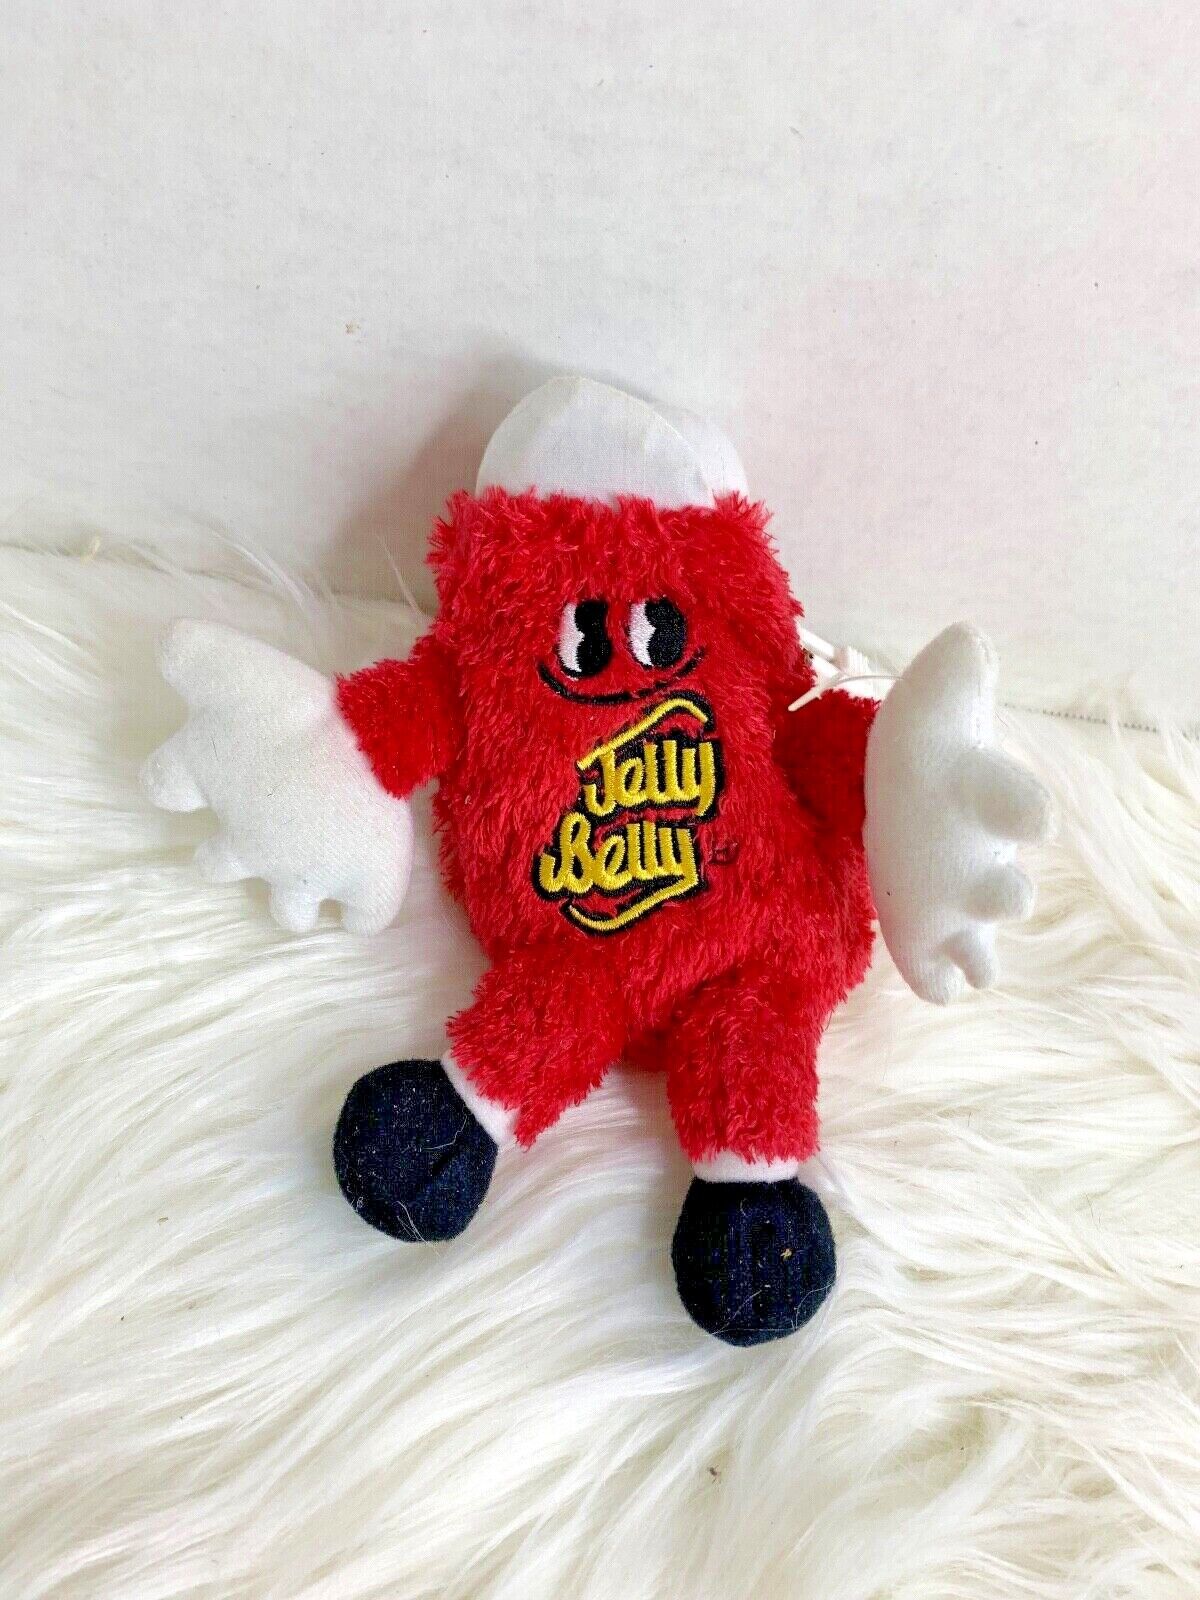 Jelly Belly Bean Bag Plush Keychain Red 2009 7.5 in Tall Stuff...